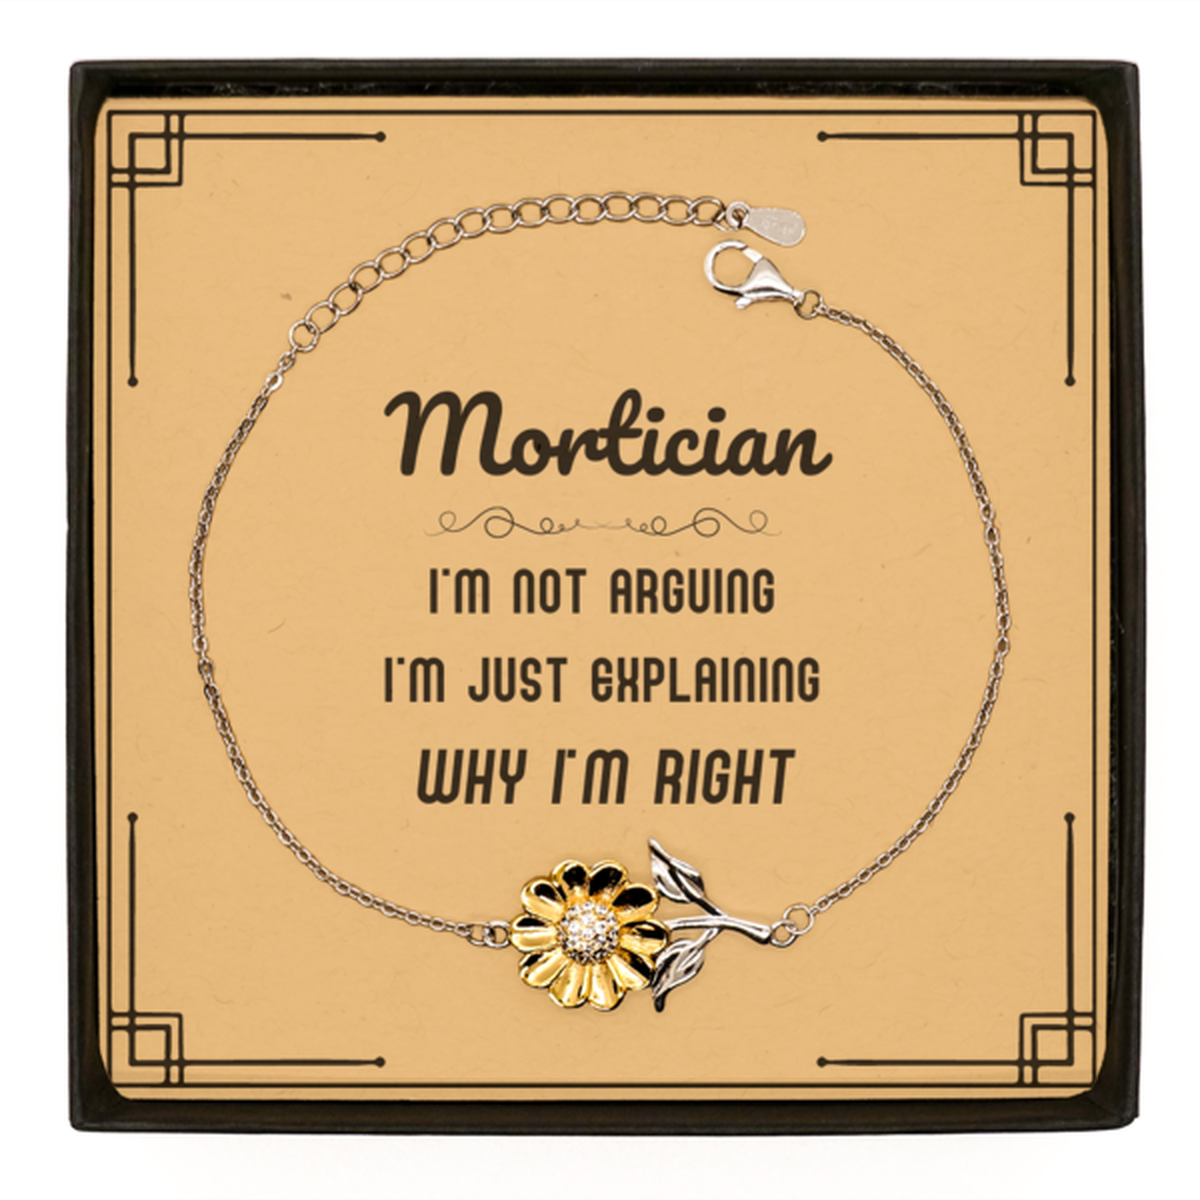 Mortician I'm not Arguing. I'm Just Explaining Why I'm RIGHT Sunflower Bracelet, Funny Saying Quote Mortician Gifts For Mortician Message Card Graduation Birthday Christmas Gifts for Men Women Coworker